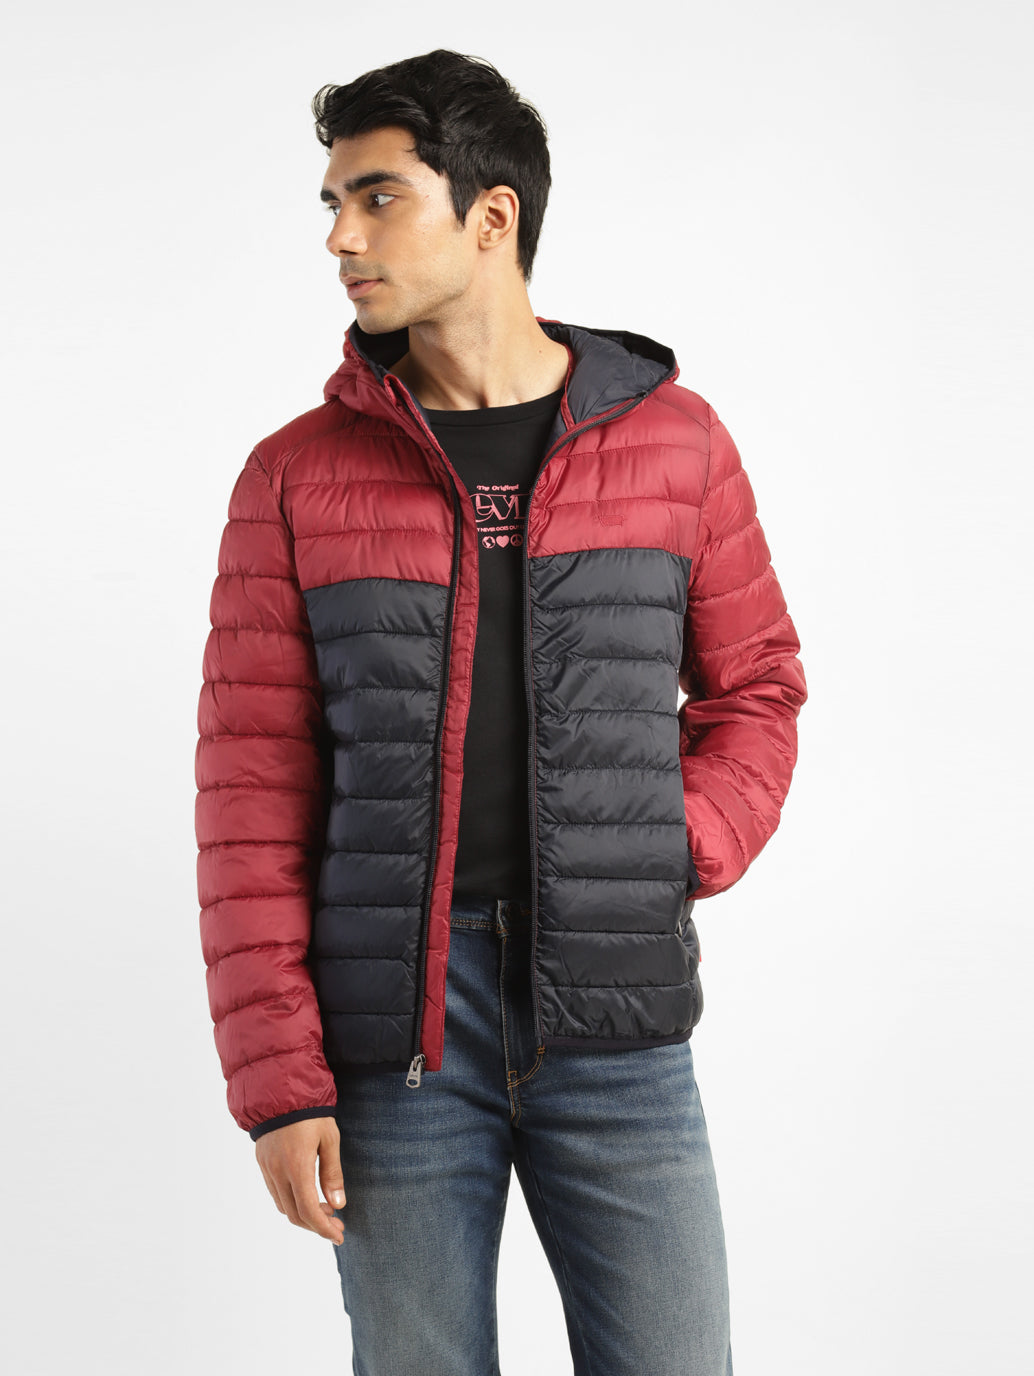 Men's Colorblock Red Hooded Jacket – Levis India Store